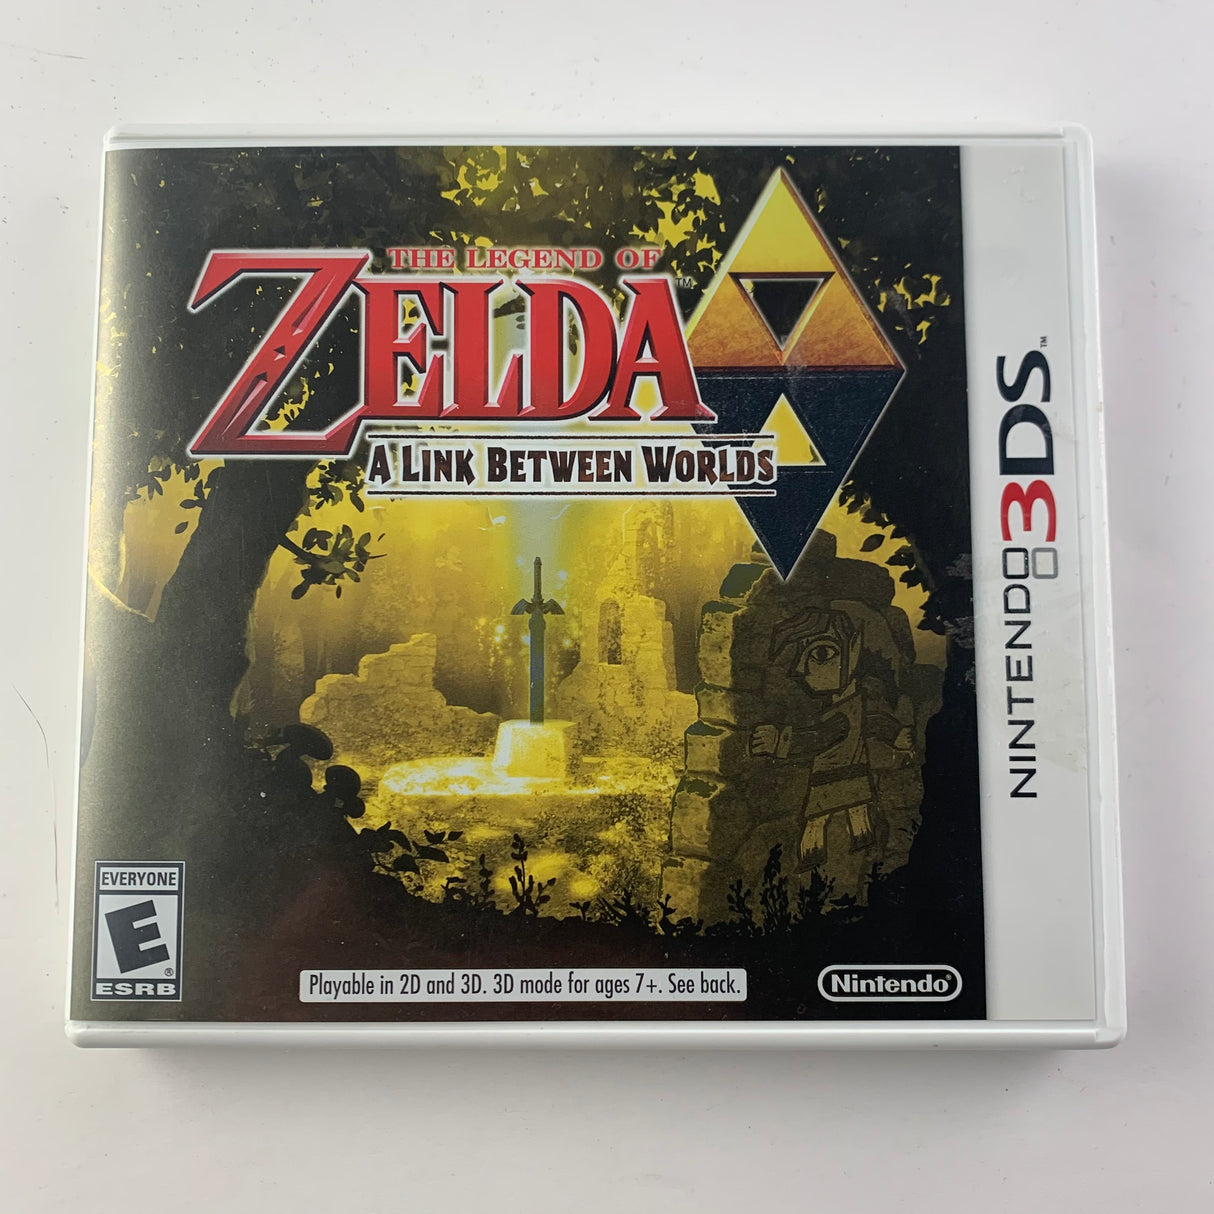 Zelda A Link Between Worlds [Game of the Year] Prices Nintendo 3DS